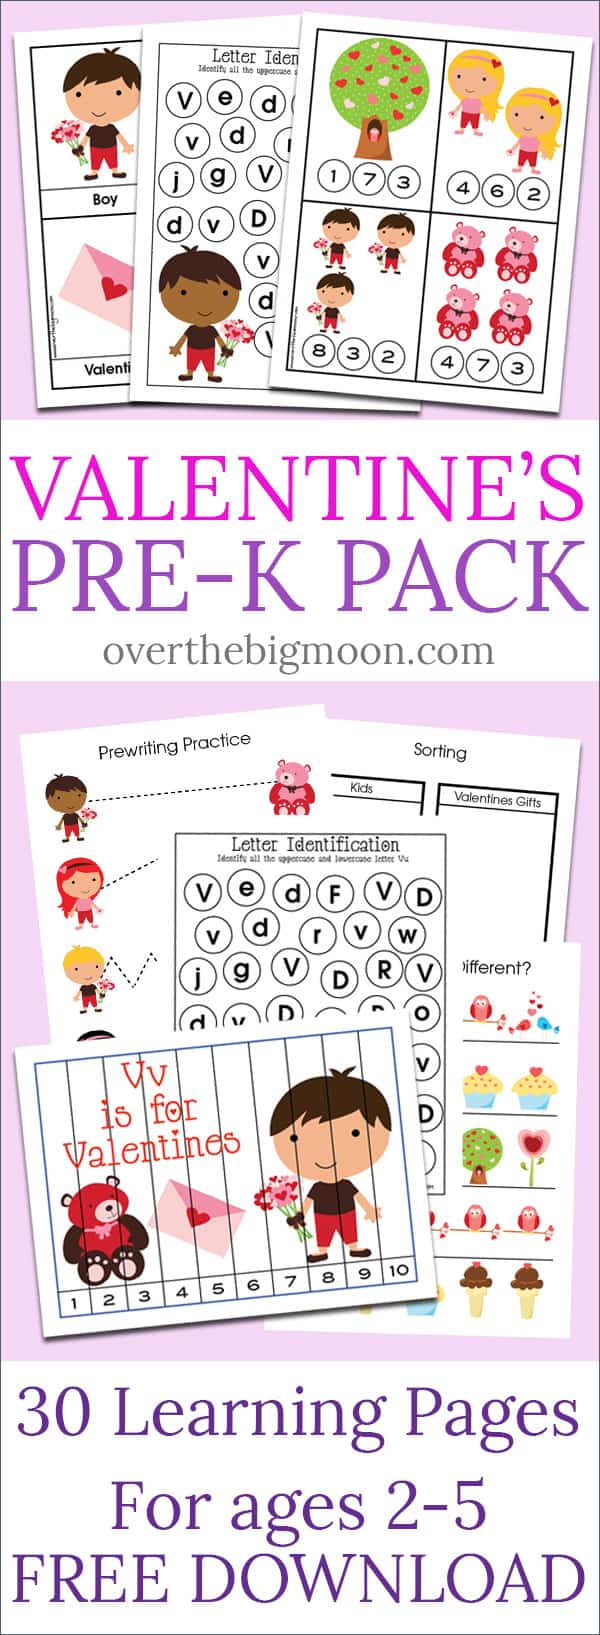 Valentine's Day Pre-K Pack - 30+ pages of fun Pre-K and Kindergarten activities that are Valentine's DayThemed! From overthebigmoon.com